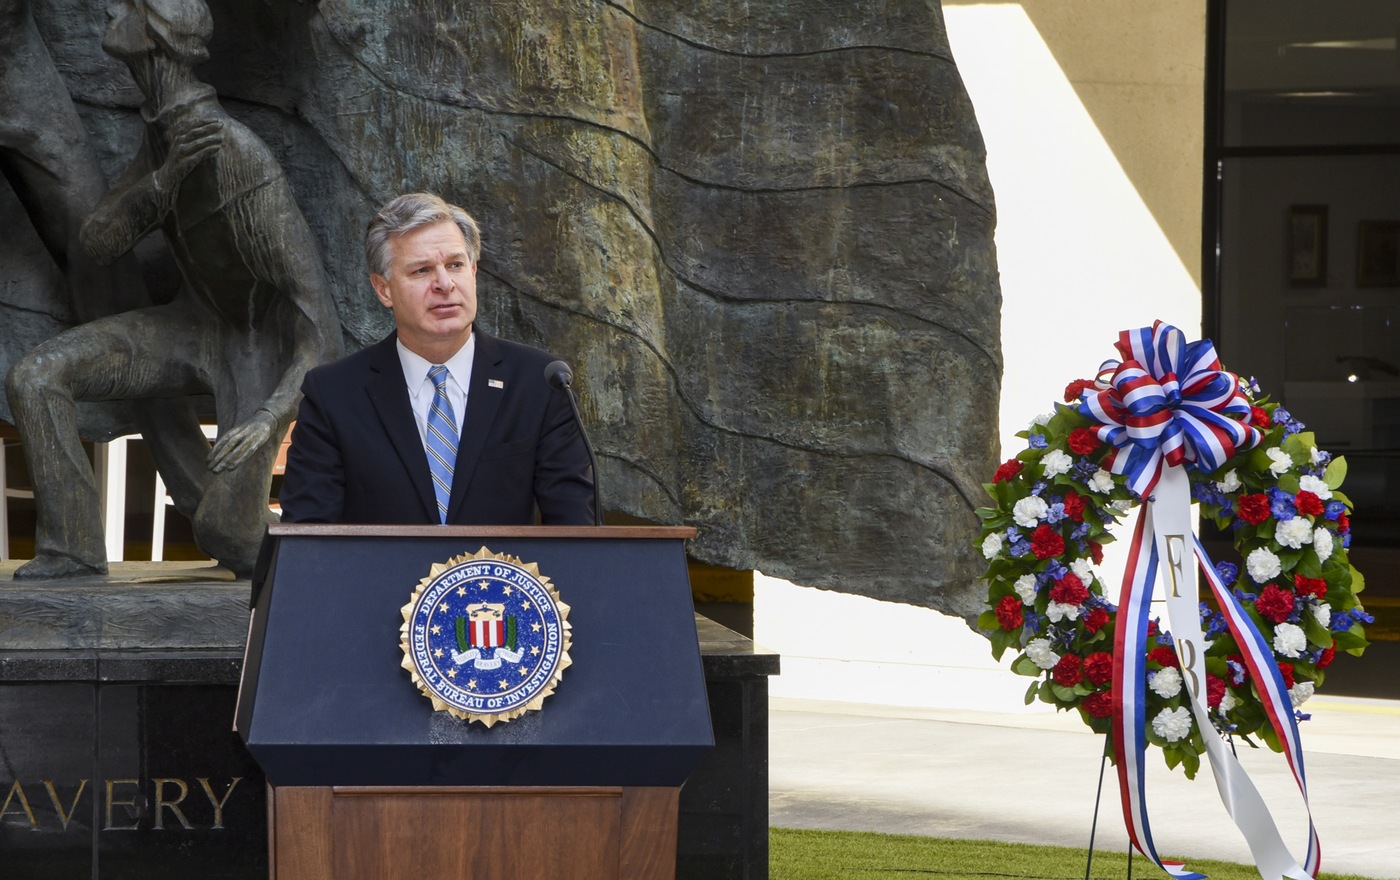 FBI Director Christopher Wray participates in a memorial service during Police Week 2021 at FBI Headquarters to honor FBI employees who have given their lives in the line of duty.